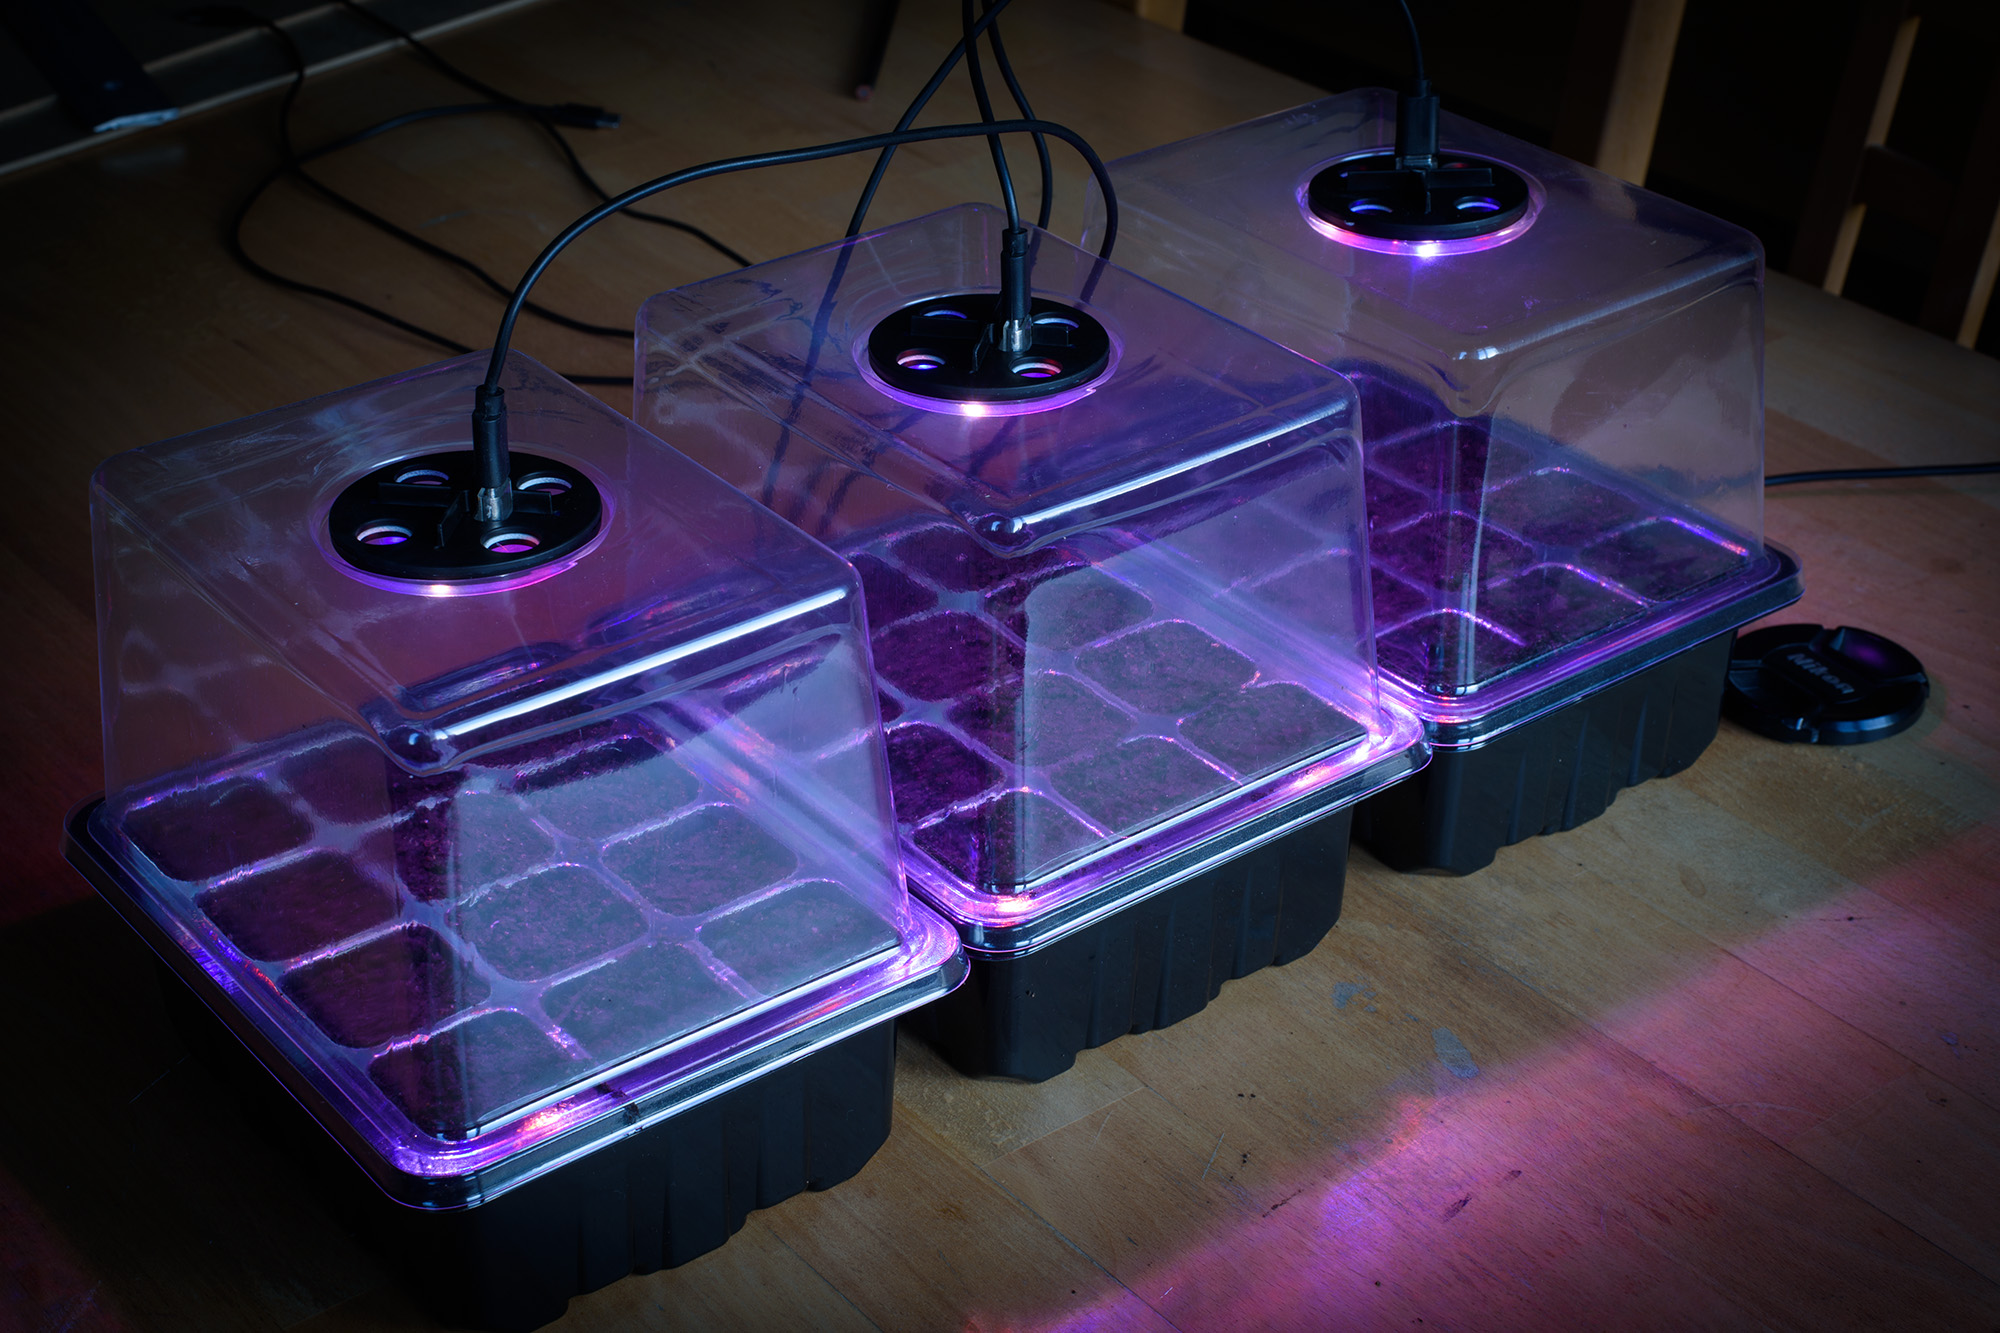 And built-in LED grow lights, with a timer!